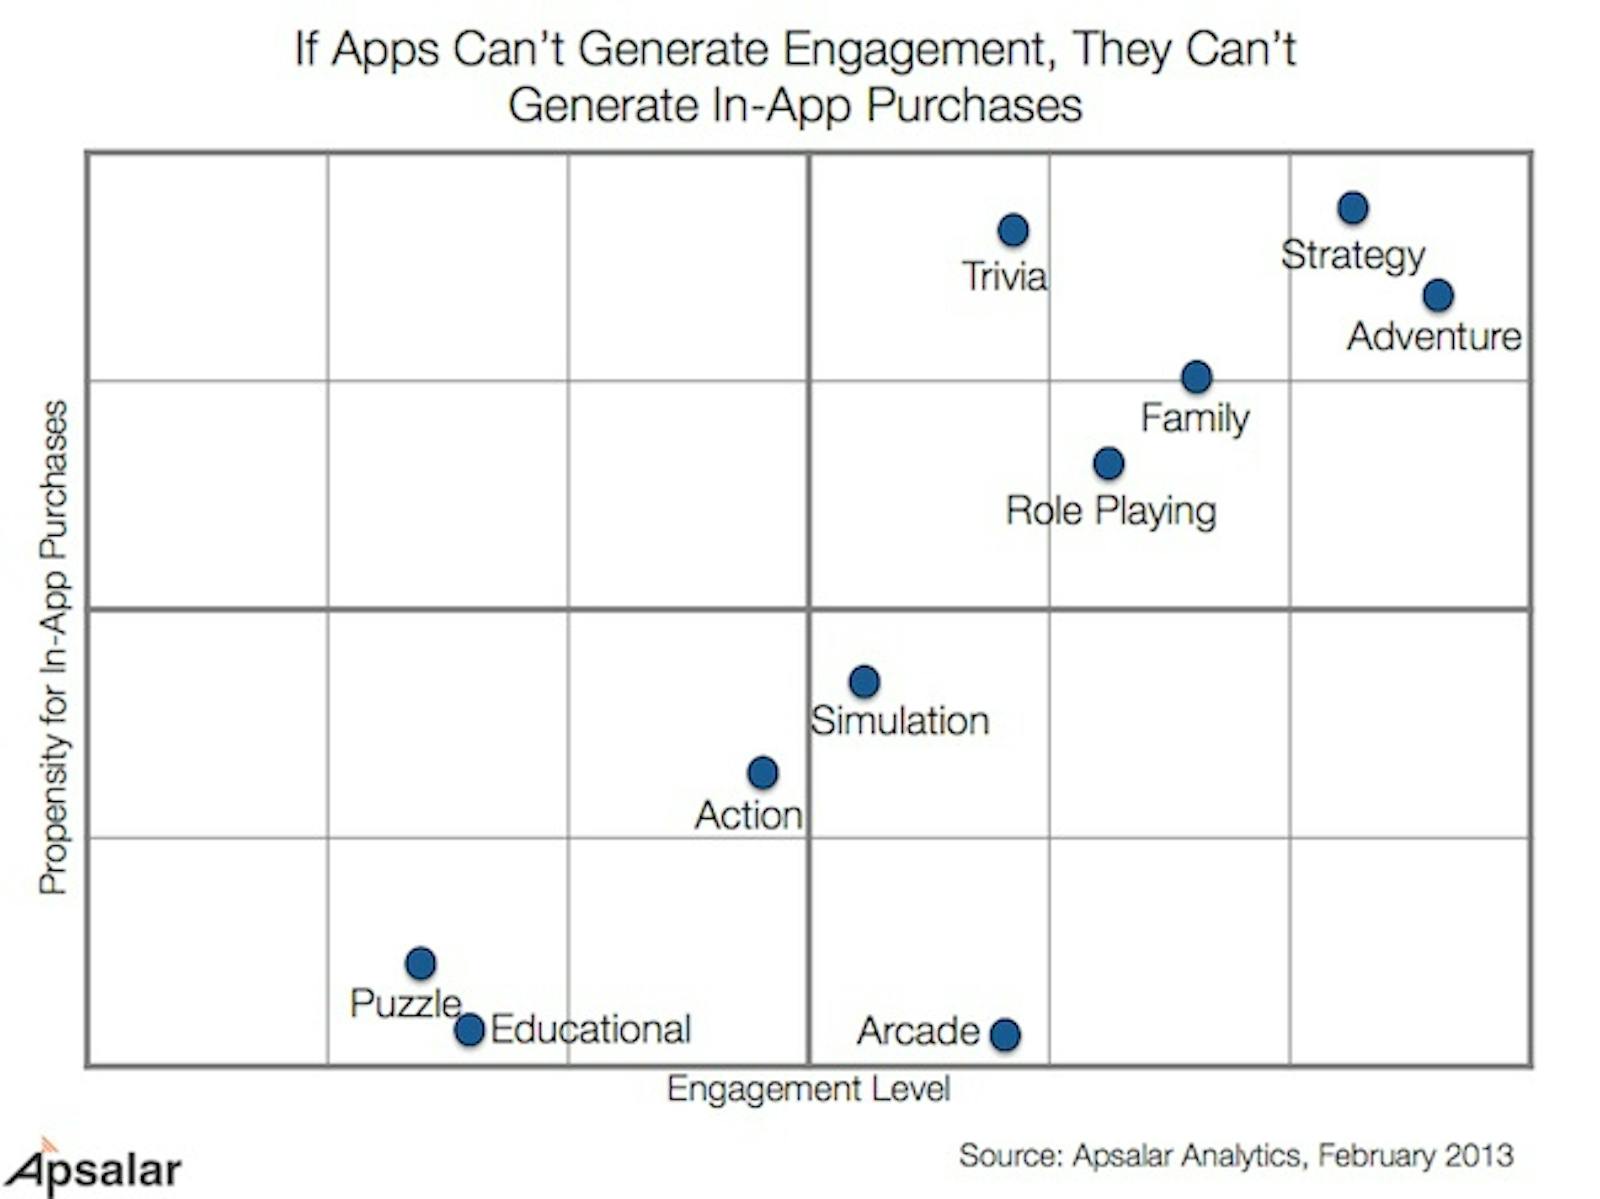 If apps can't generate engagement, they can't generate in-app purchases